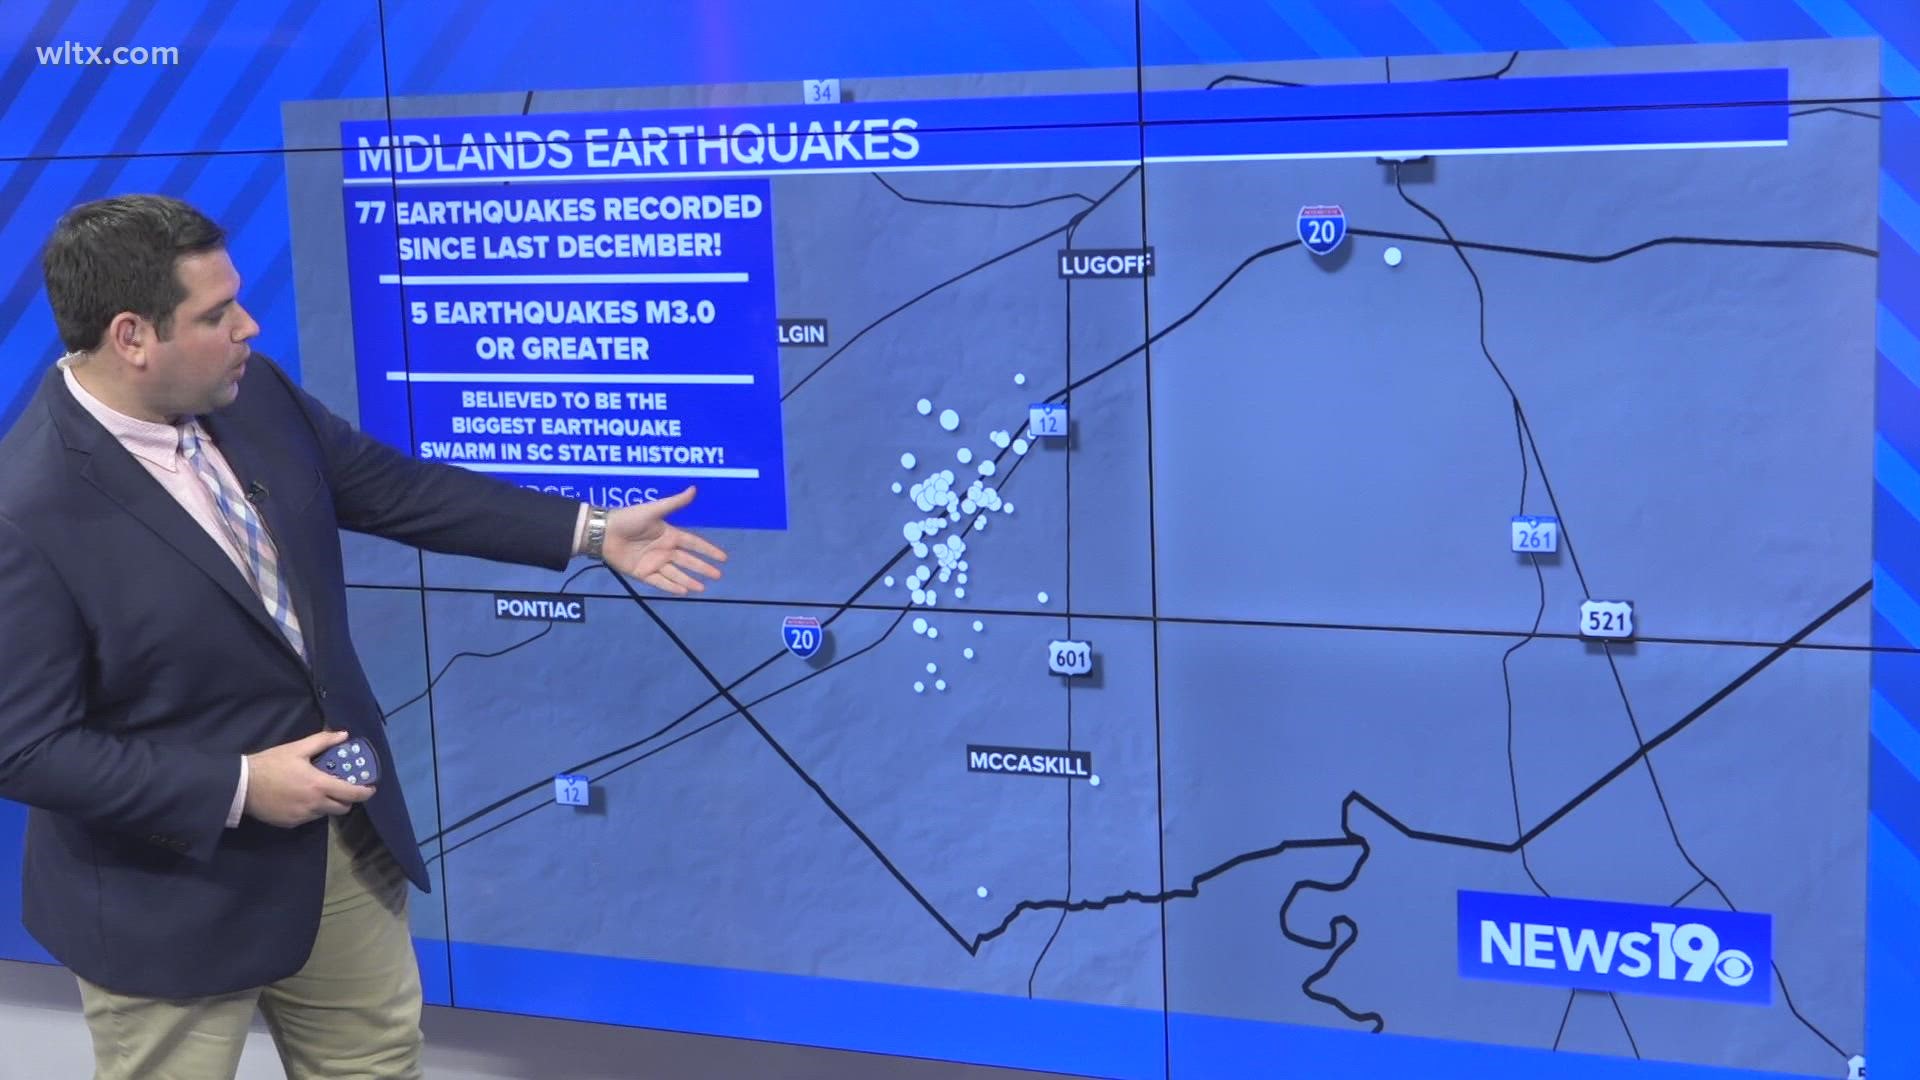 The earthquake happened on Saturday but wasn't announced by the U.S. Geological Survey until early Sunday morning.